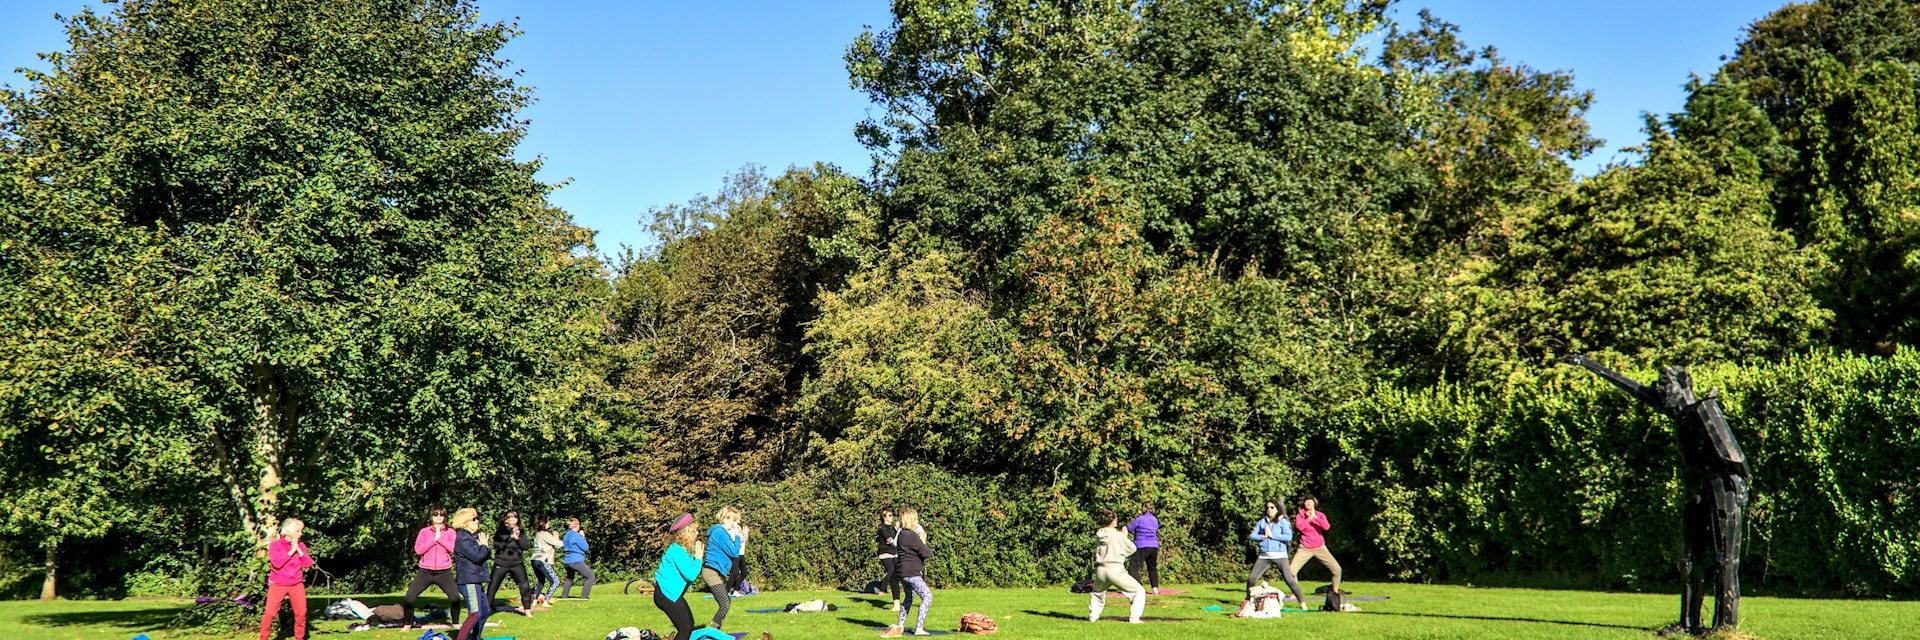 Dublin, Ireland - Sept 26, 2020: Big group of adult people attending outdoor class, practicing social distancing and exercising yoga outside on lawn on sunny warm autumn day in Marlay Park. Lifestyle; Shutterstock ID 1901169343; your: Bridget Brown; gl: 65050; netsuite: Online Editorial; full: POI Image Update